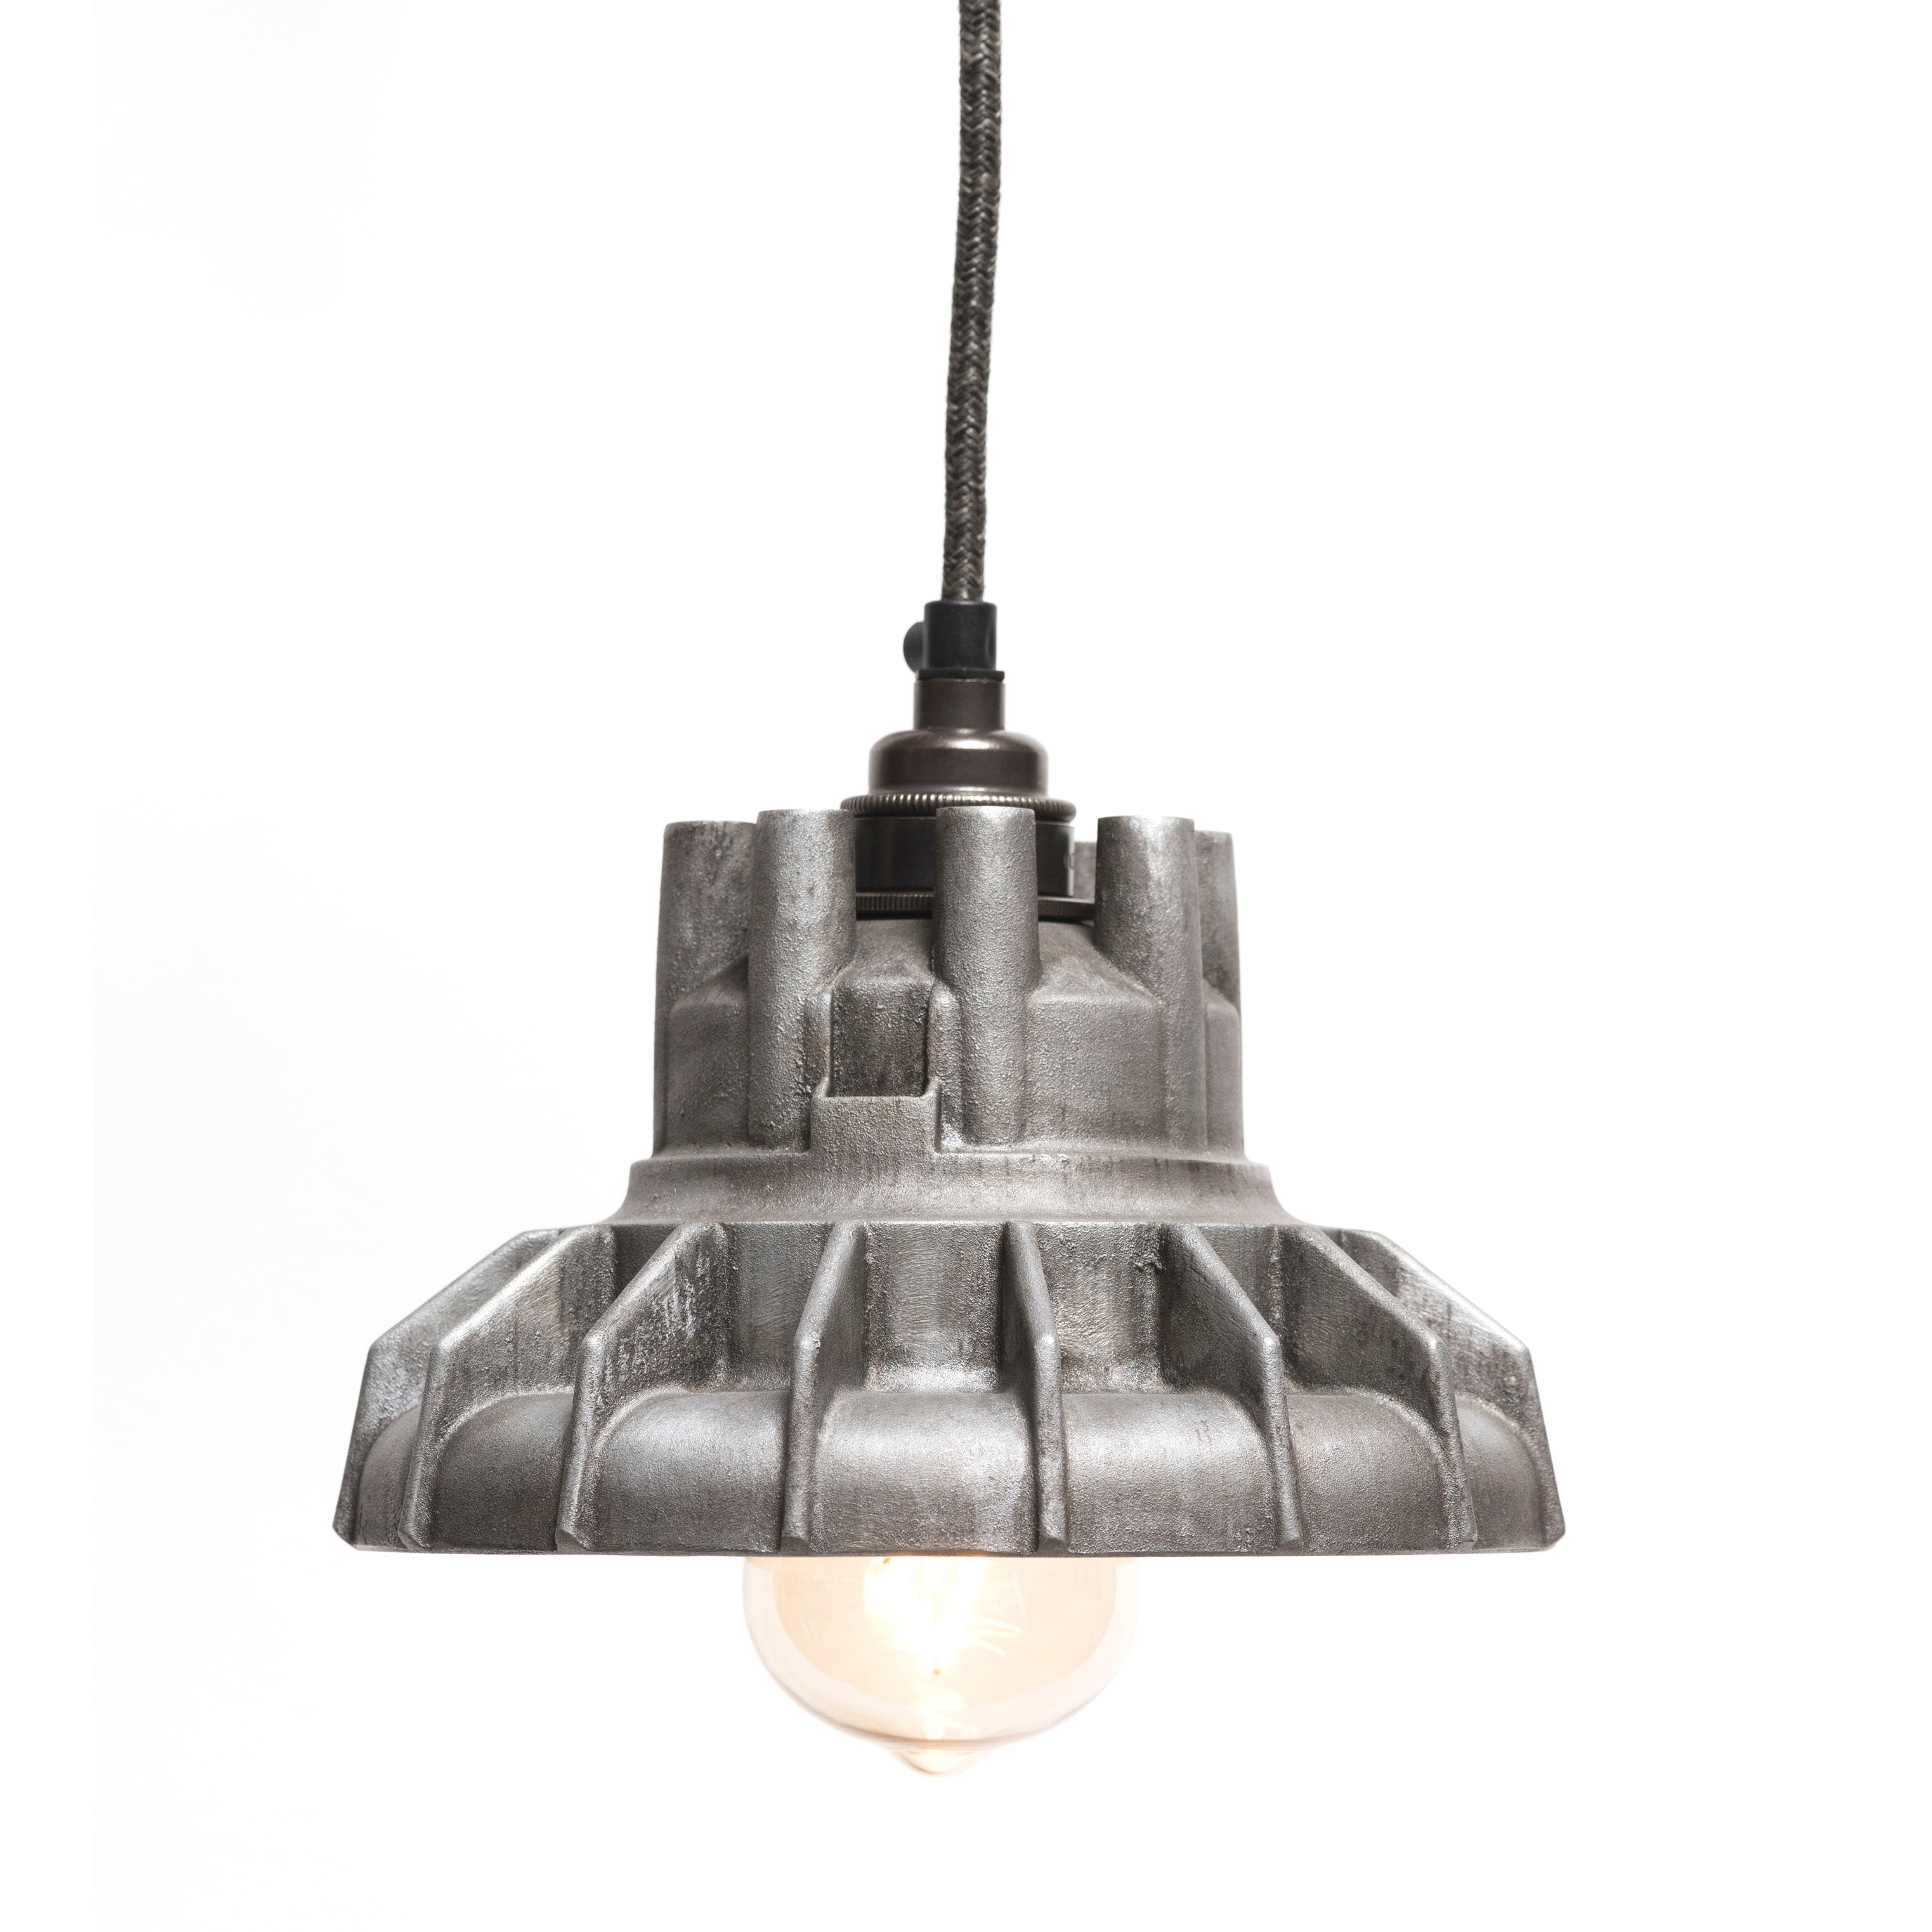 The Rag & Bone Man Pattern #4 Combination pendant lamp in polished aluminium from Warehouse Home